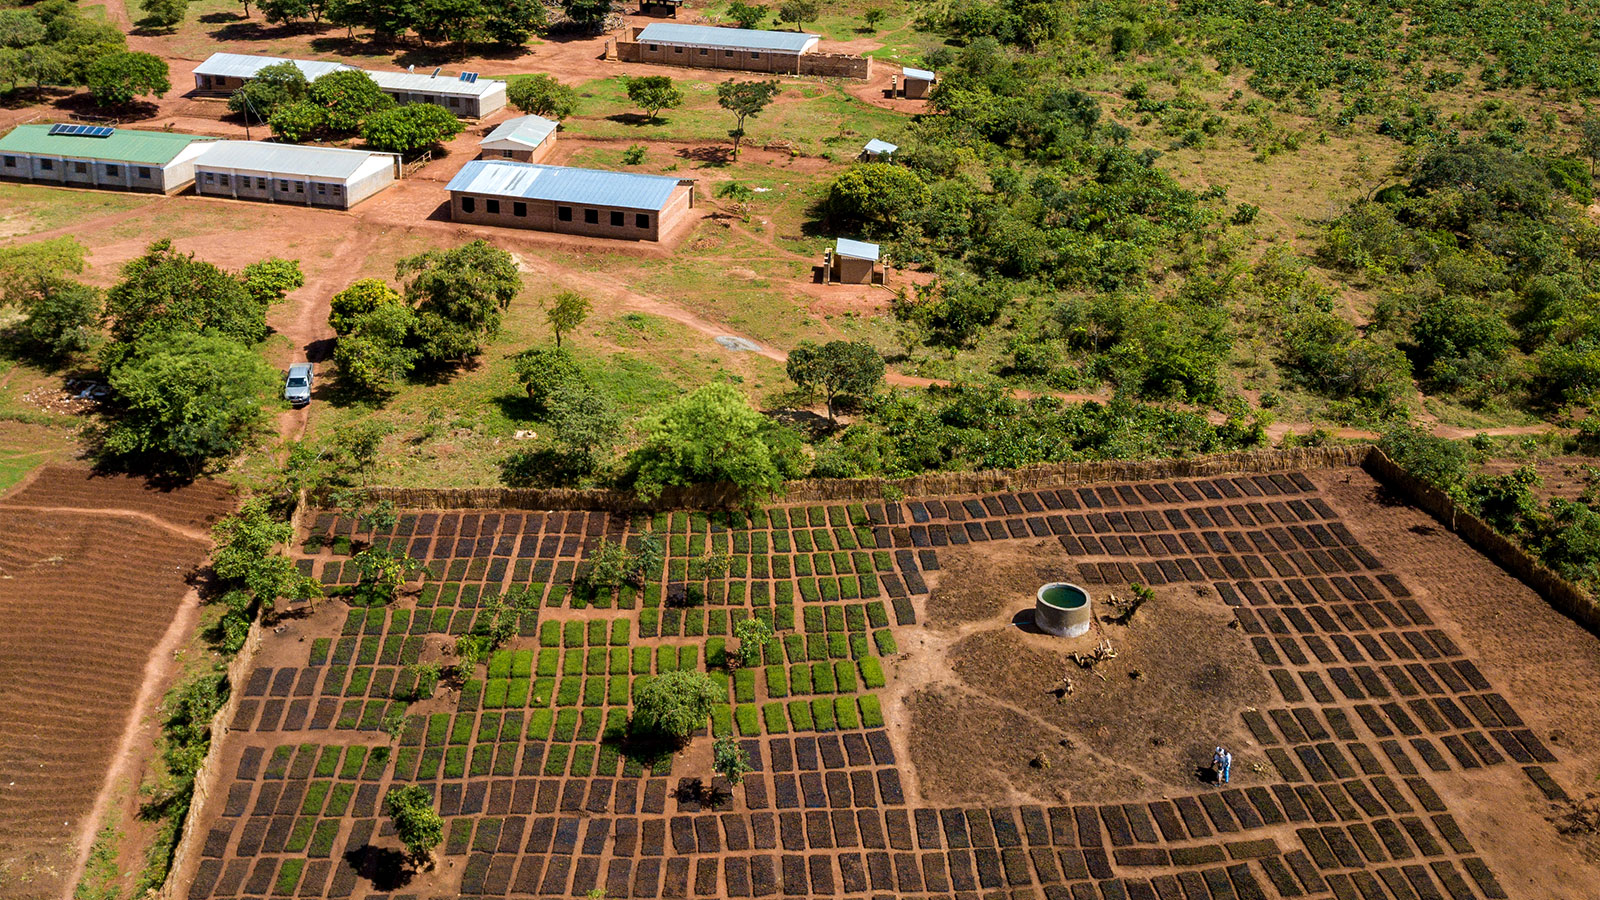 aerial view of the reforesting projects